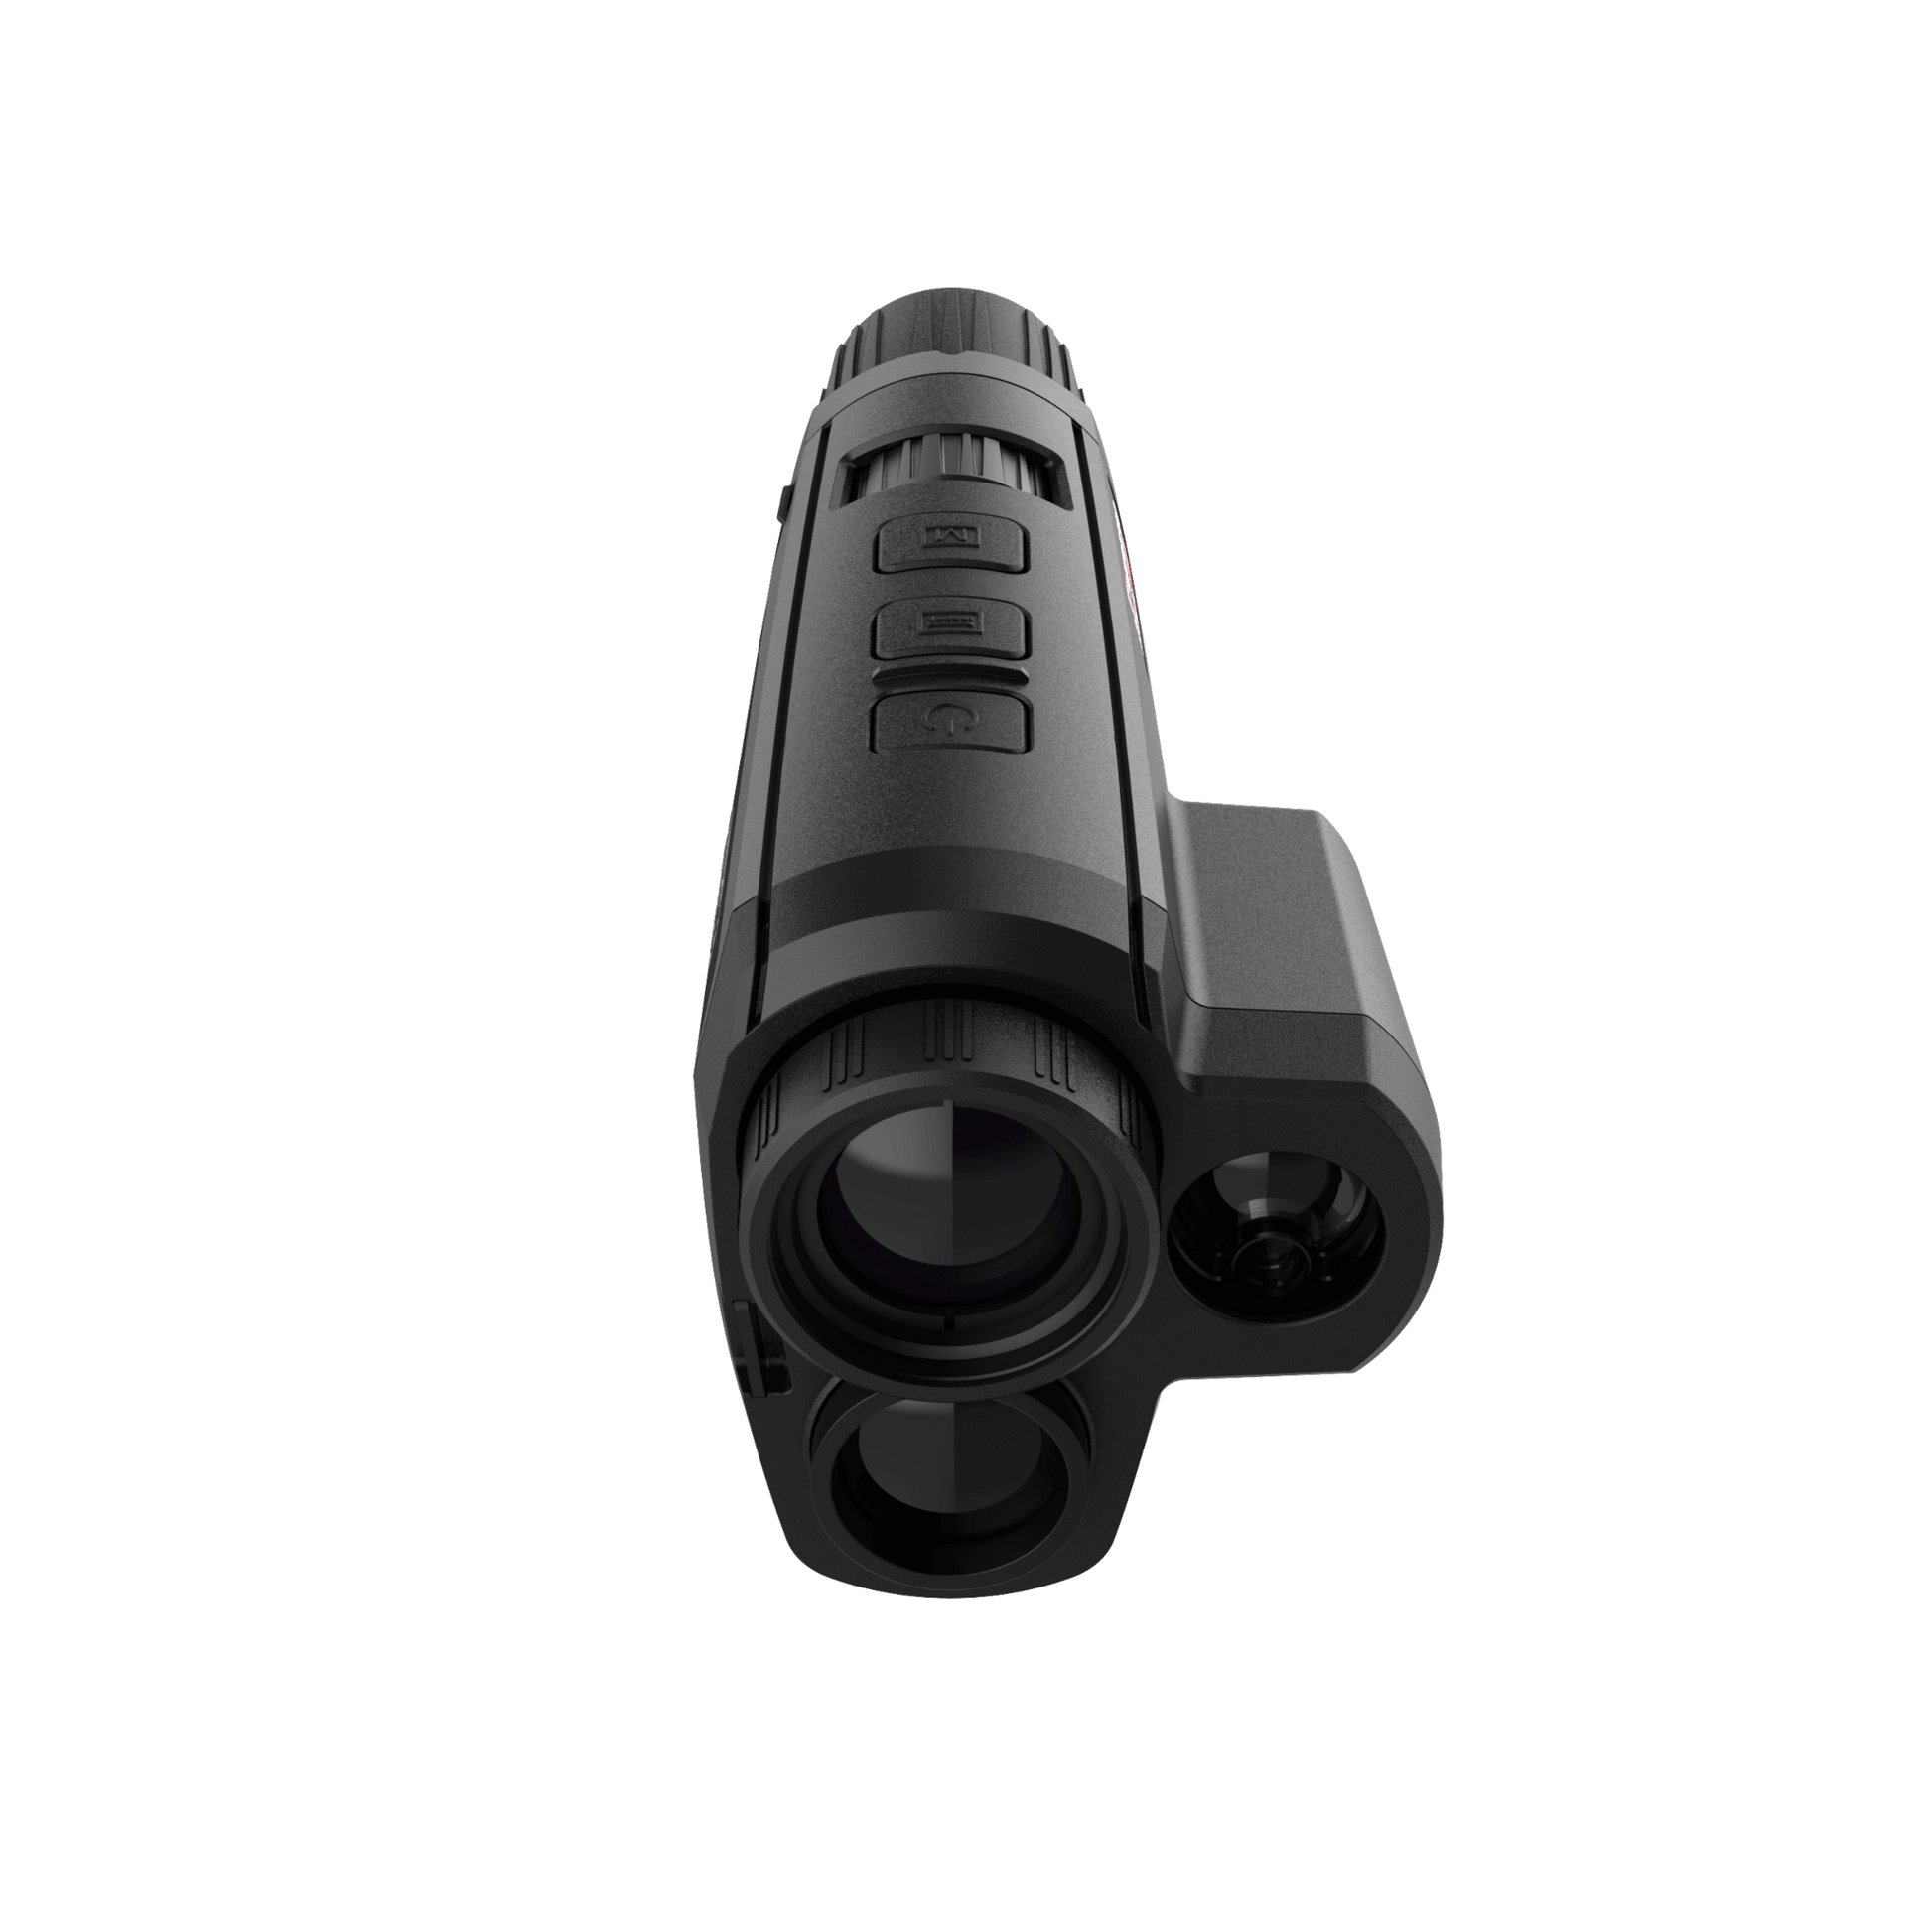 Cape Thermal imaging monocular for sale - HikMicro Gryphon GH25L Handheld thermal monocular front view from above